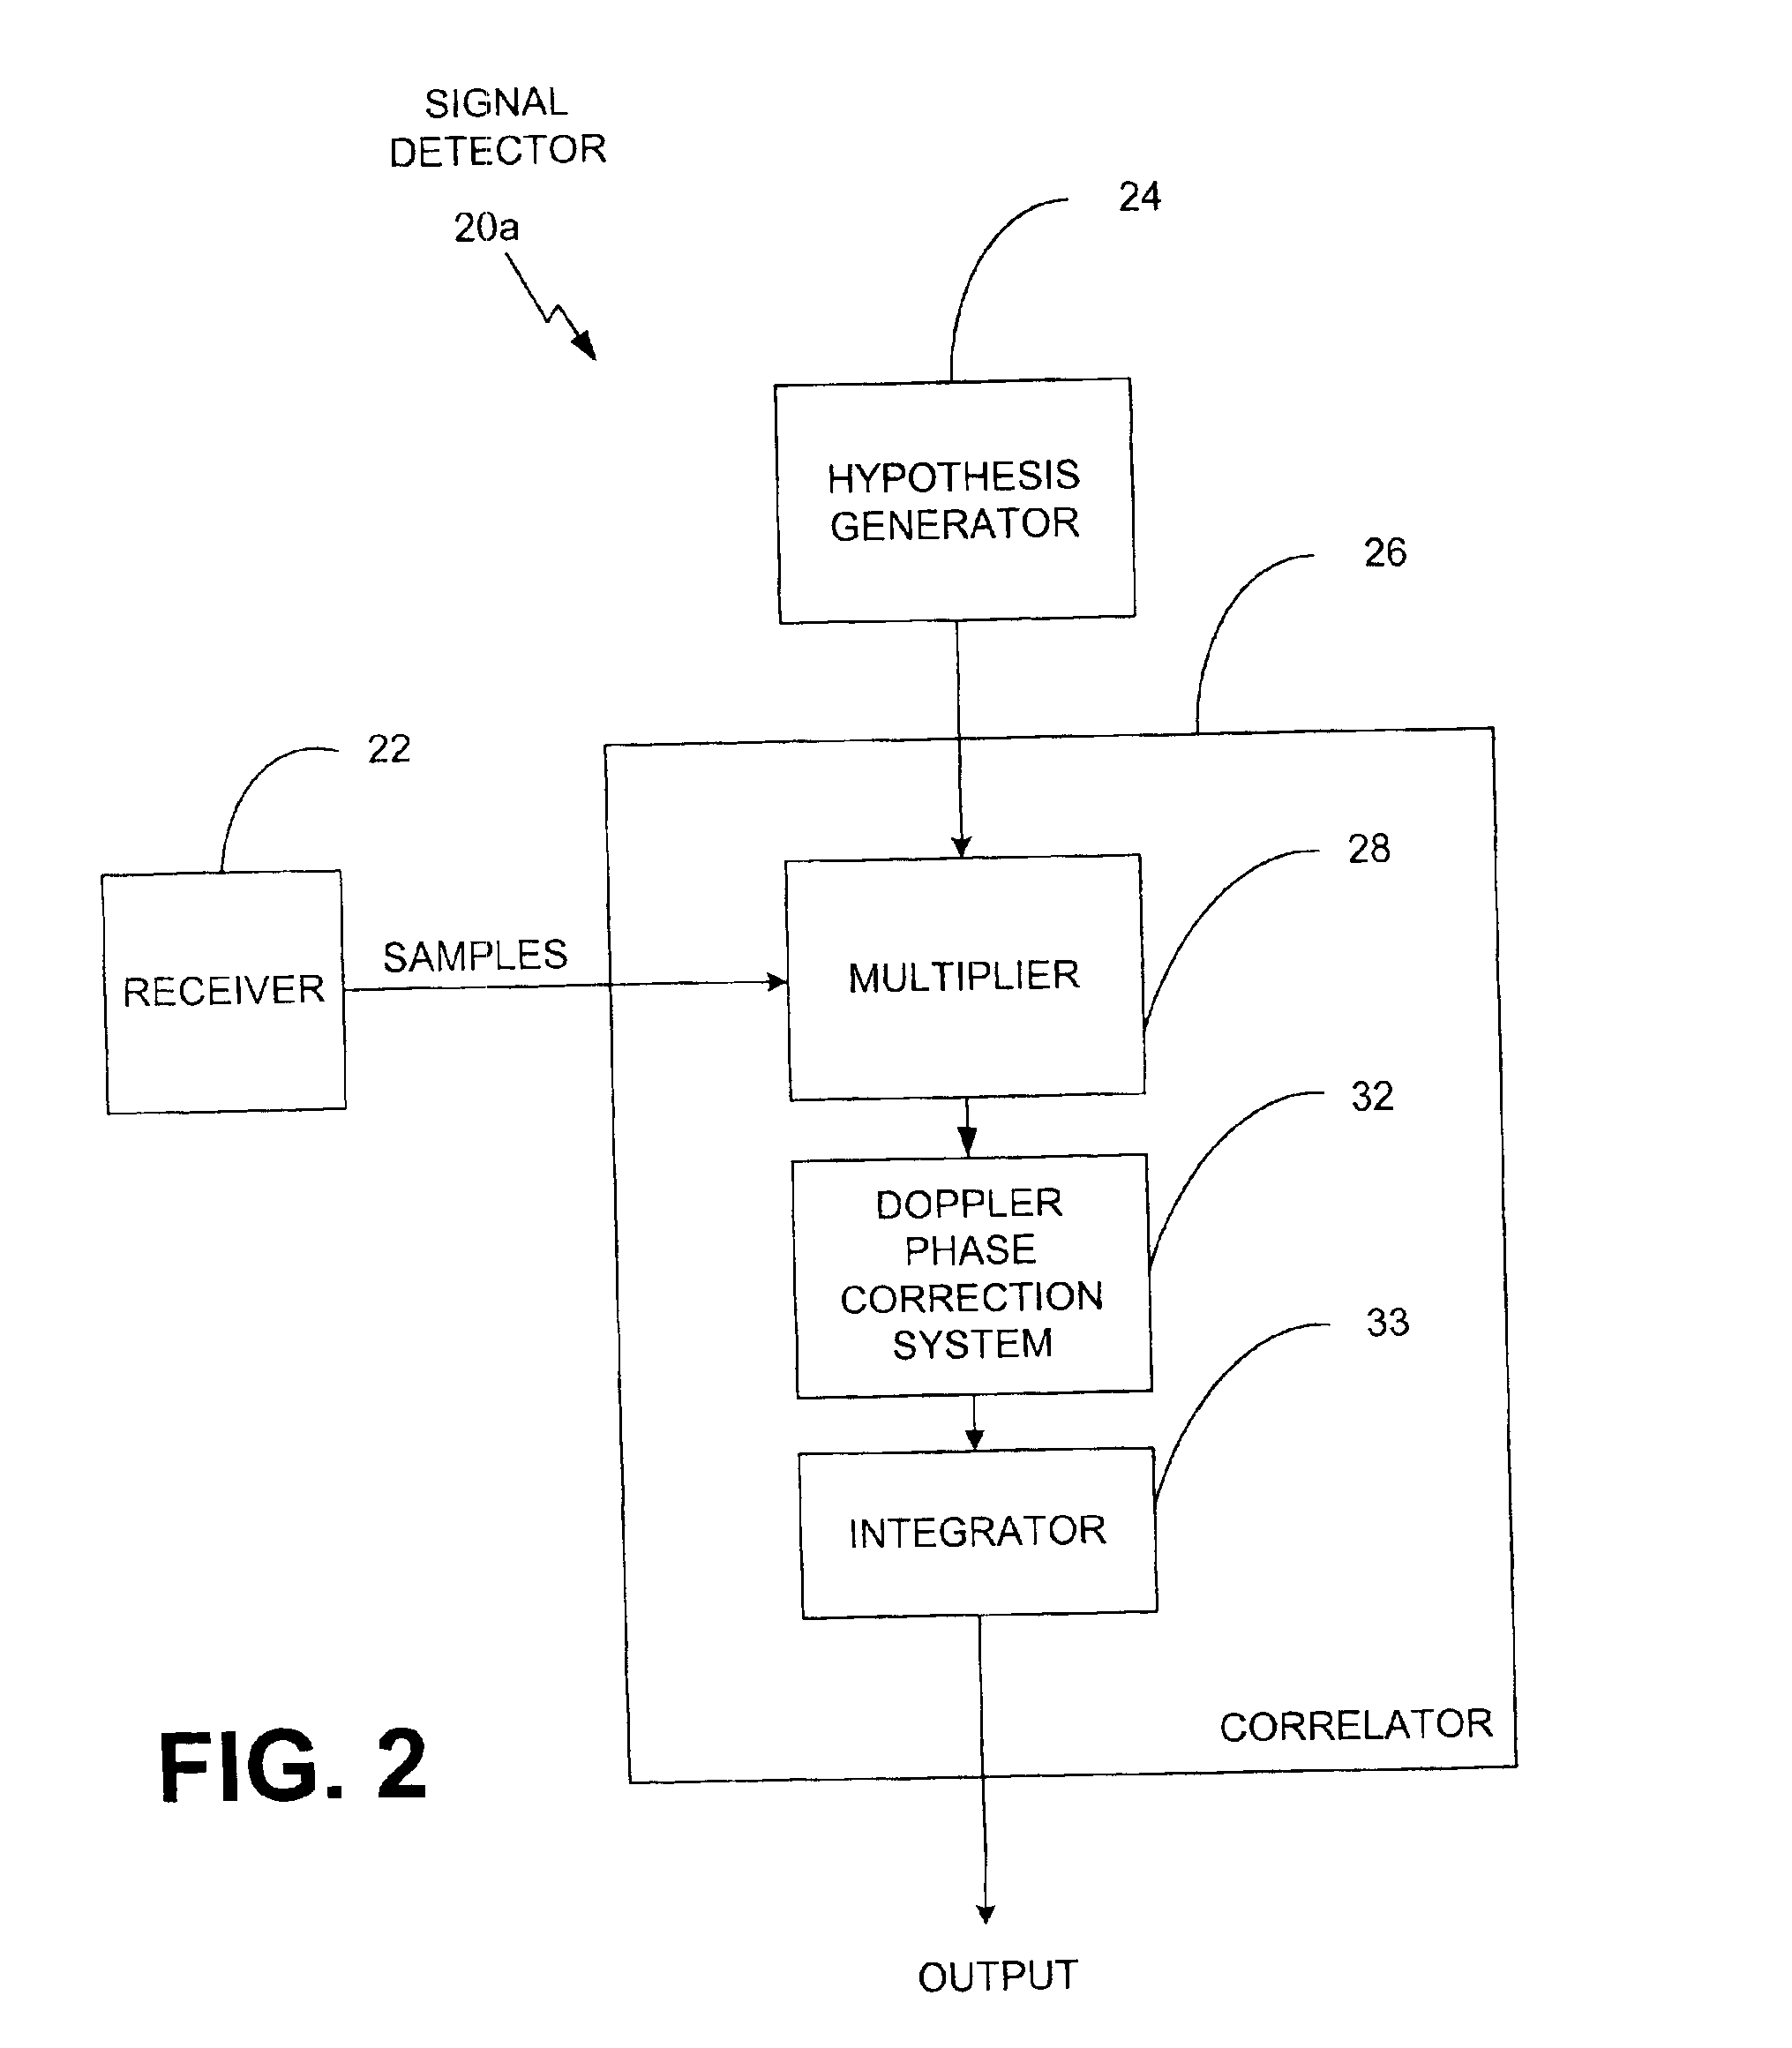 Signal detector employing a Doppler phase correction system